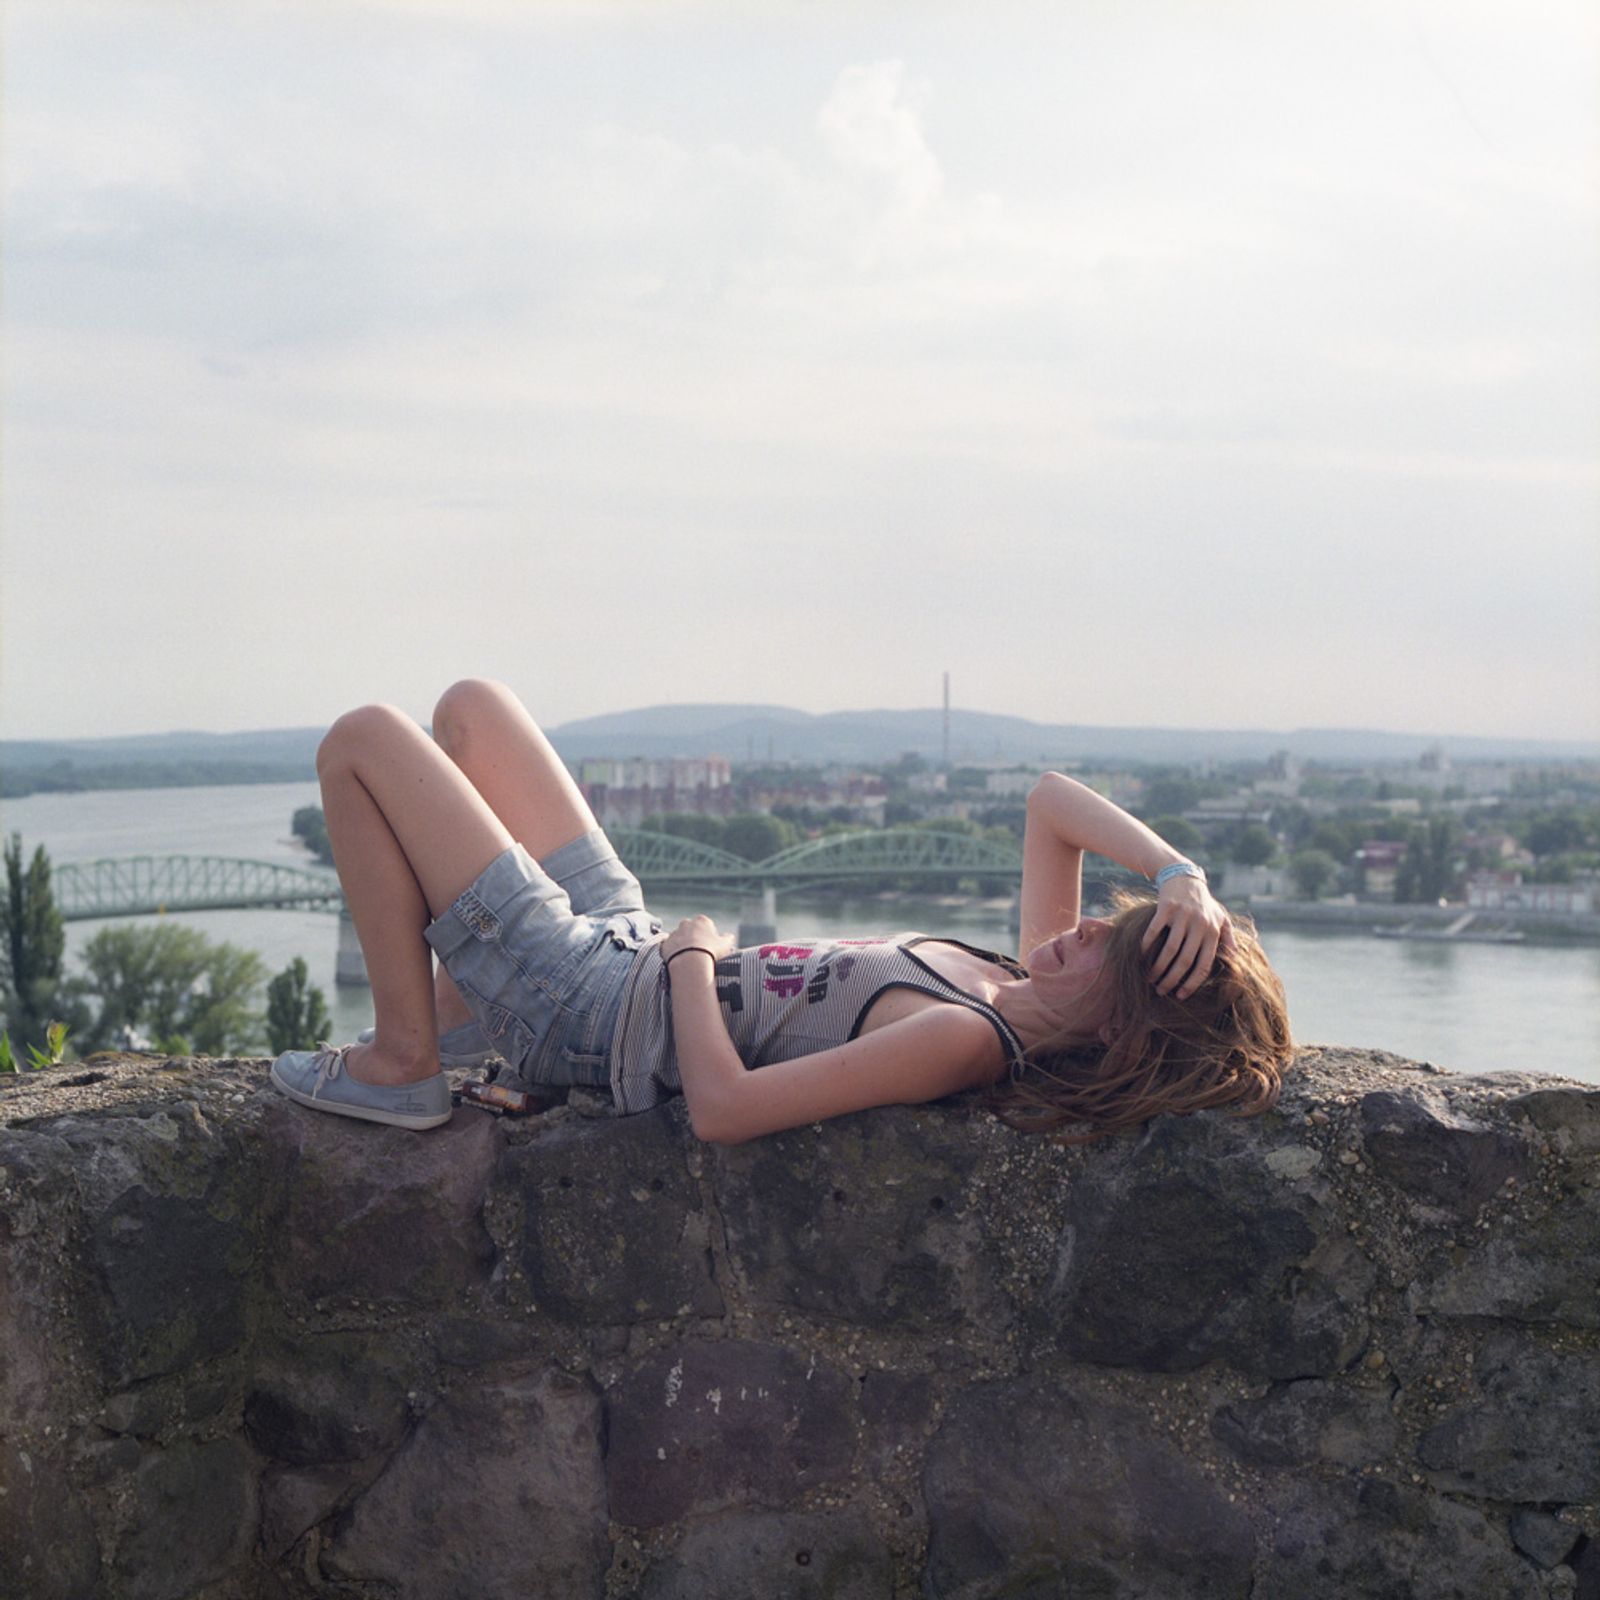 © Chiara Fossati - A young girl in Esztergom sunbathes while waiting for some friends at the top of the Castle overlooking the Danube, Hungary.